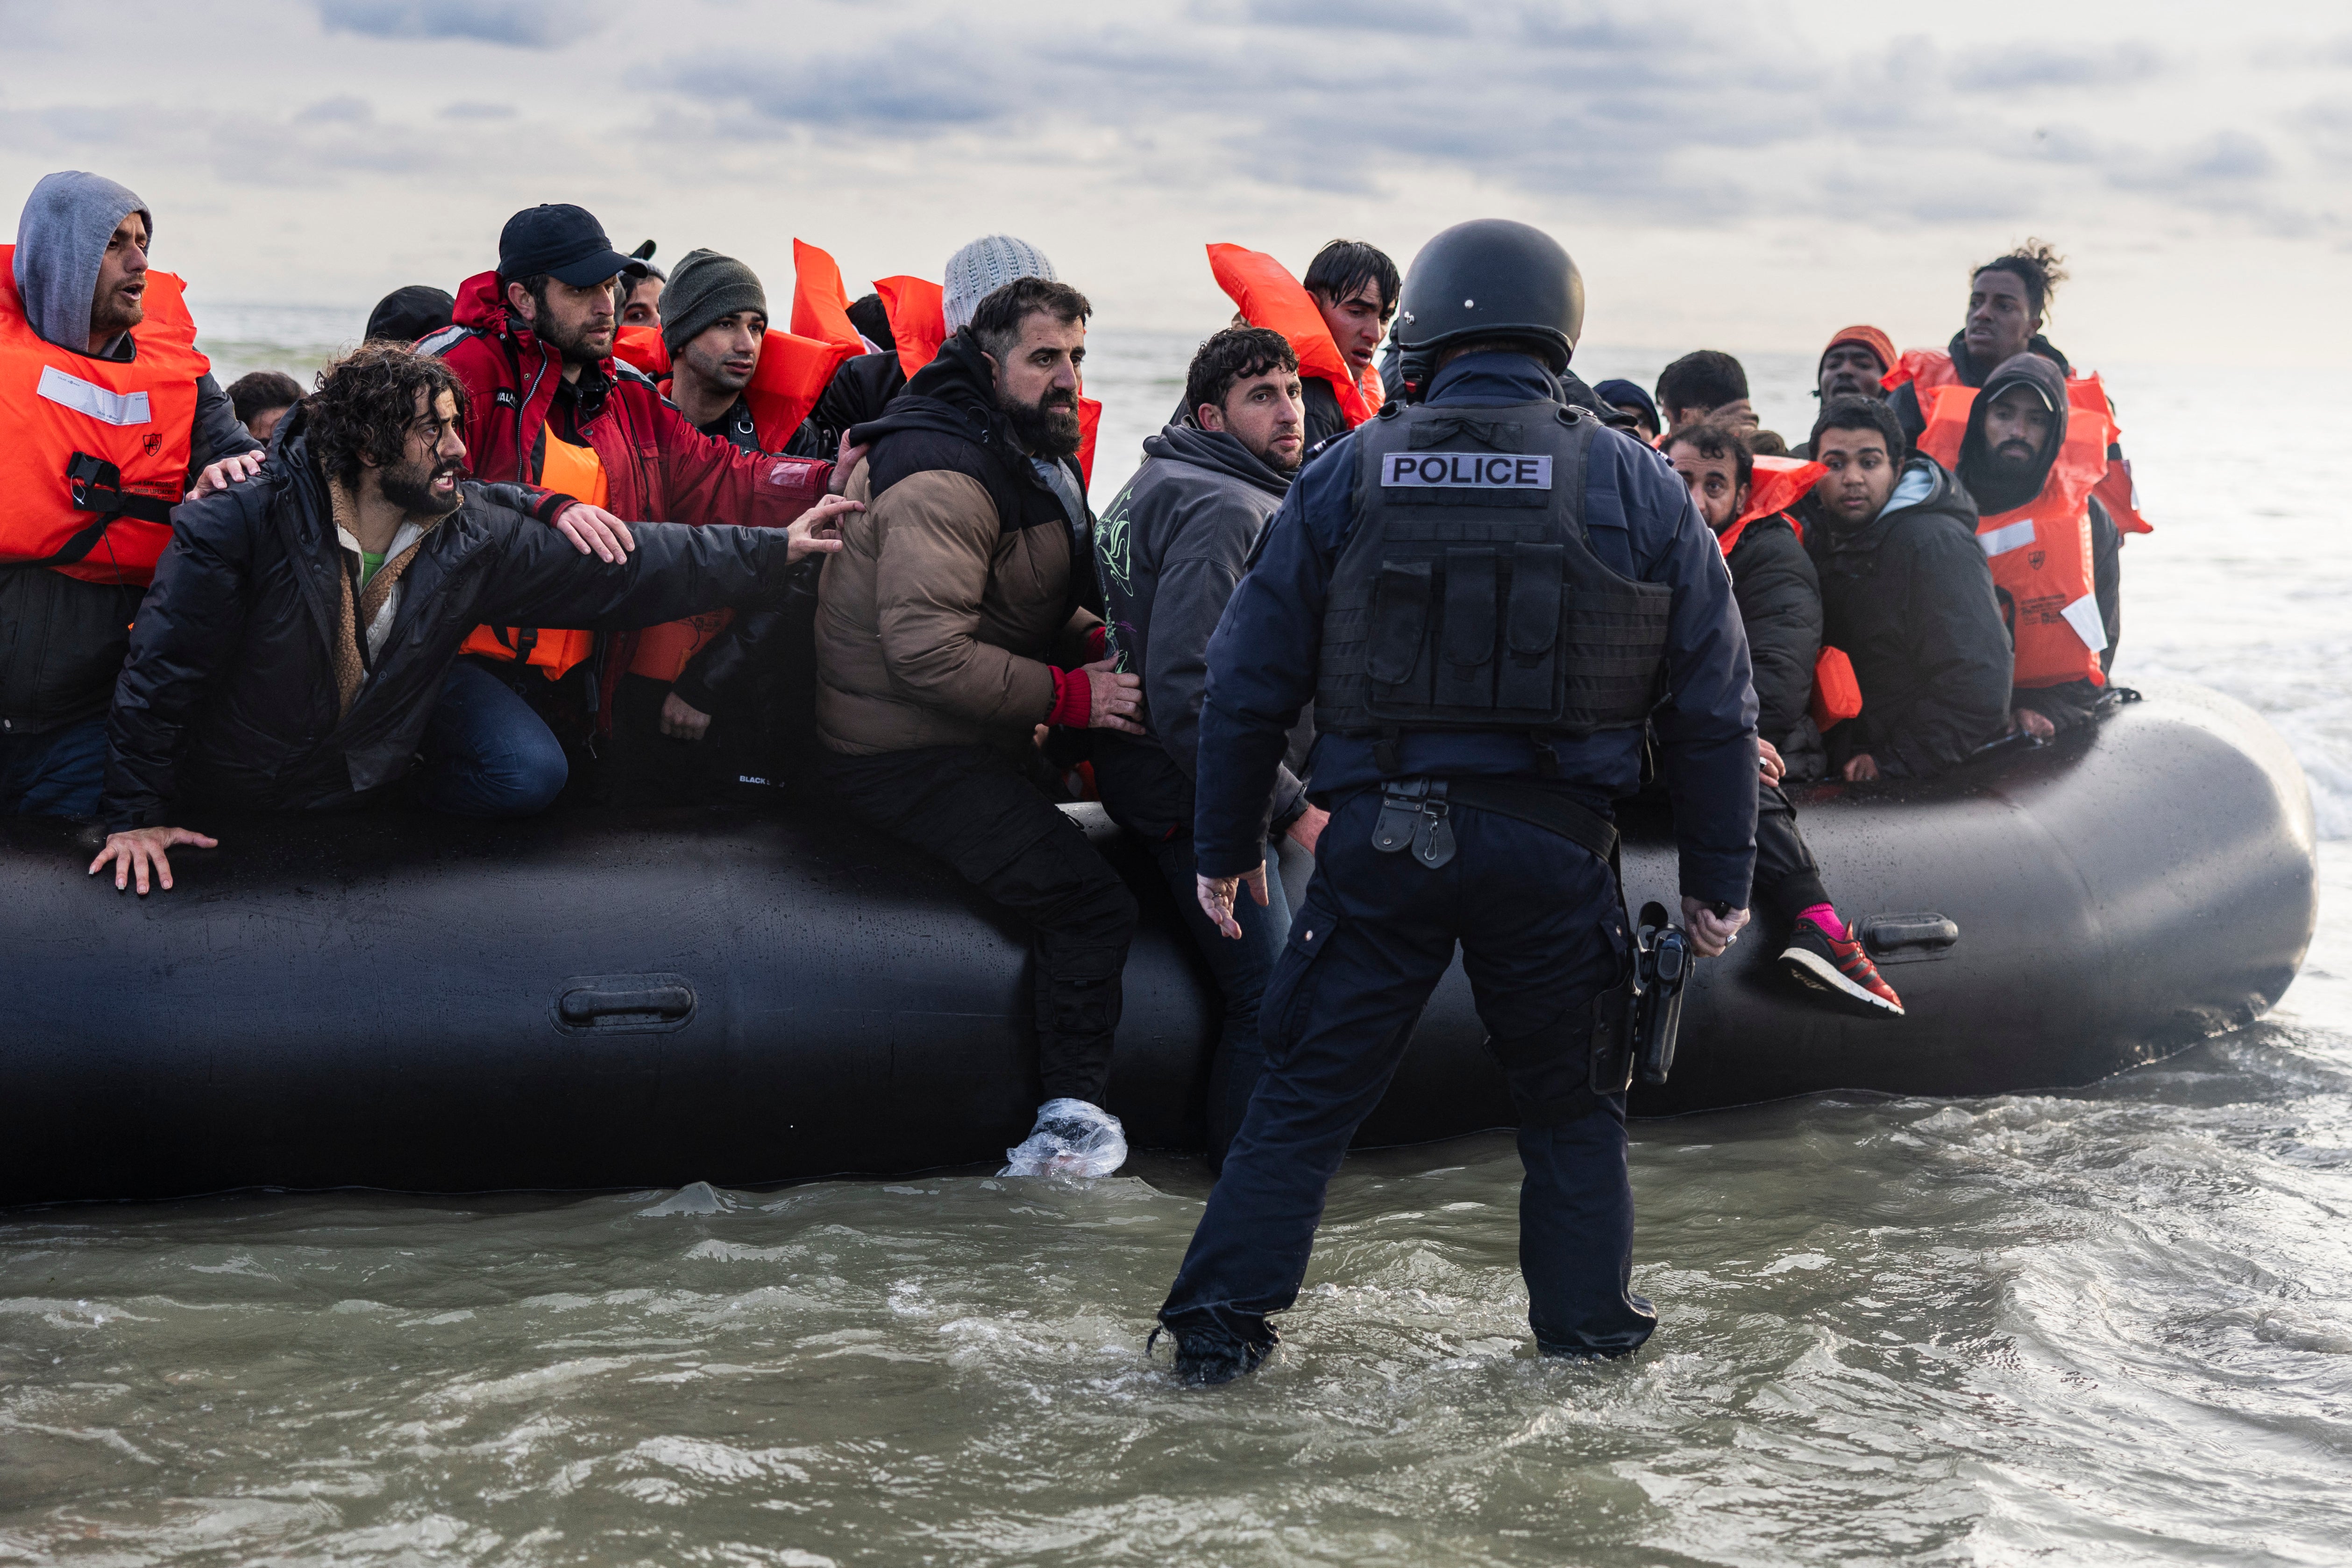 Migrants react as a French police officer stands by ready to puncture the smuggler’s boat to prevent migrants from embarking in an attempt to cross the English Channel